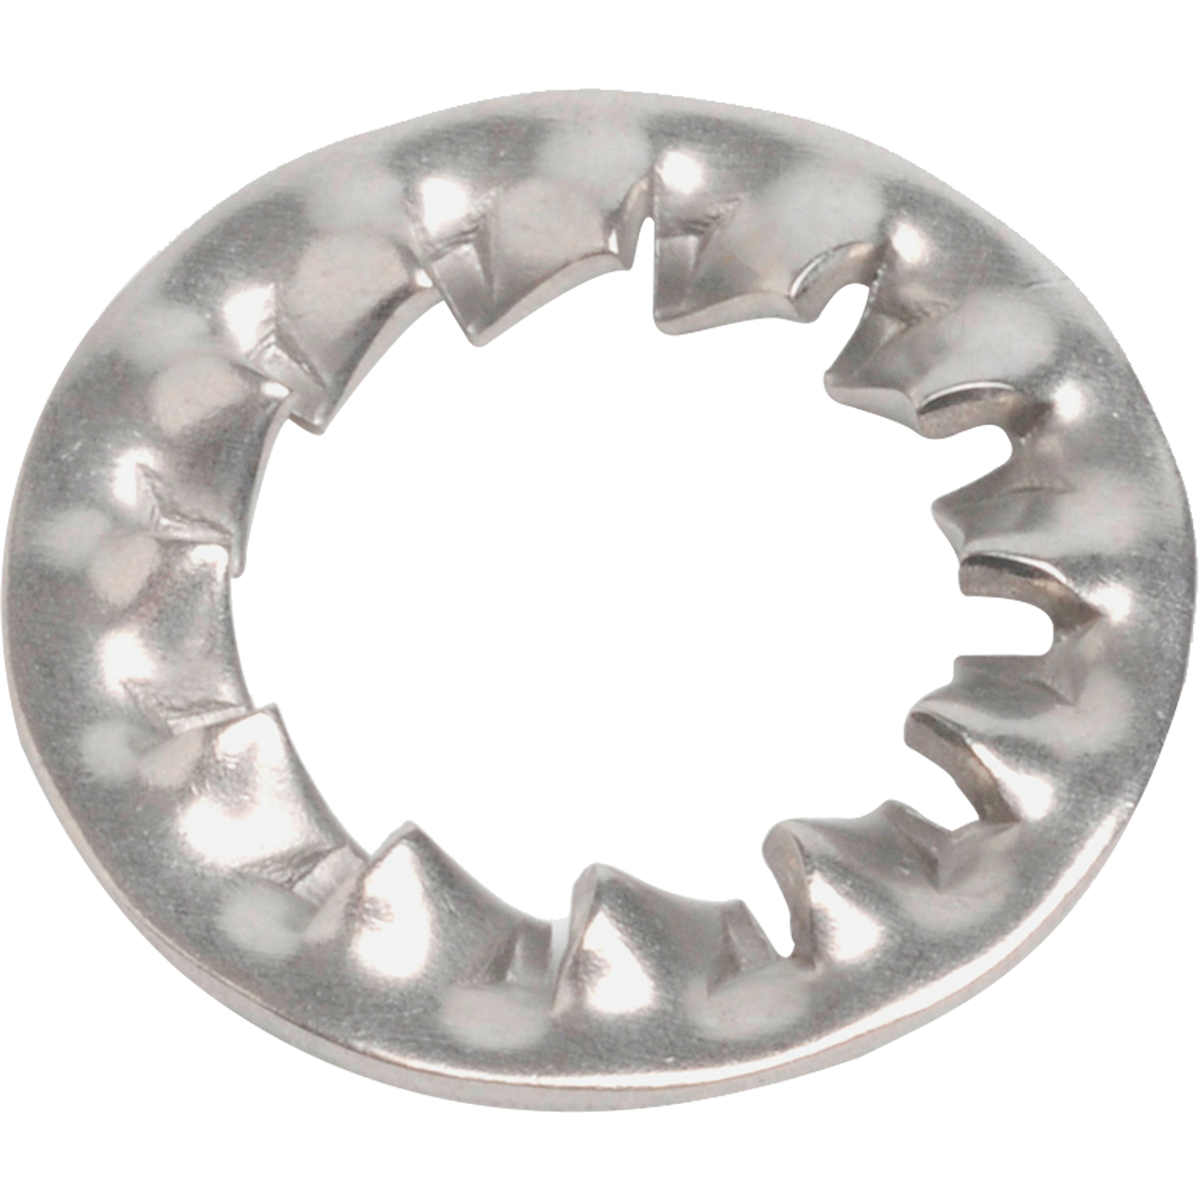 Serrated fine tooth locking washers with internal teeth to prevent the fastener from coming loose over time, especially in locations where vibration might be an issue.